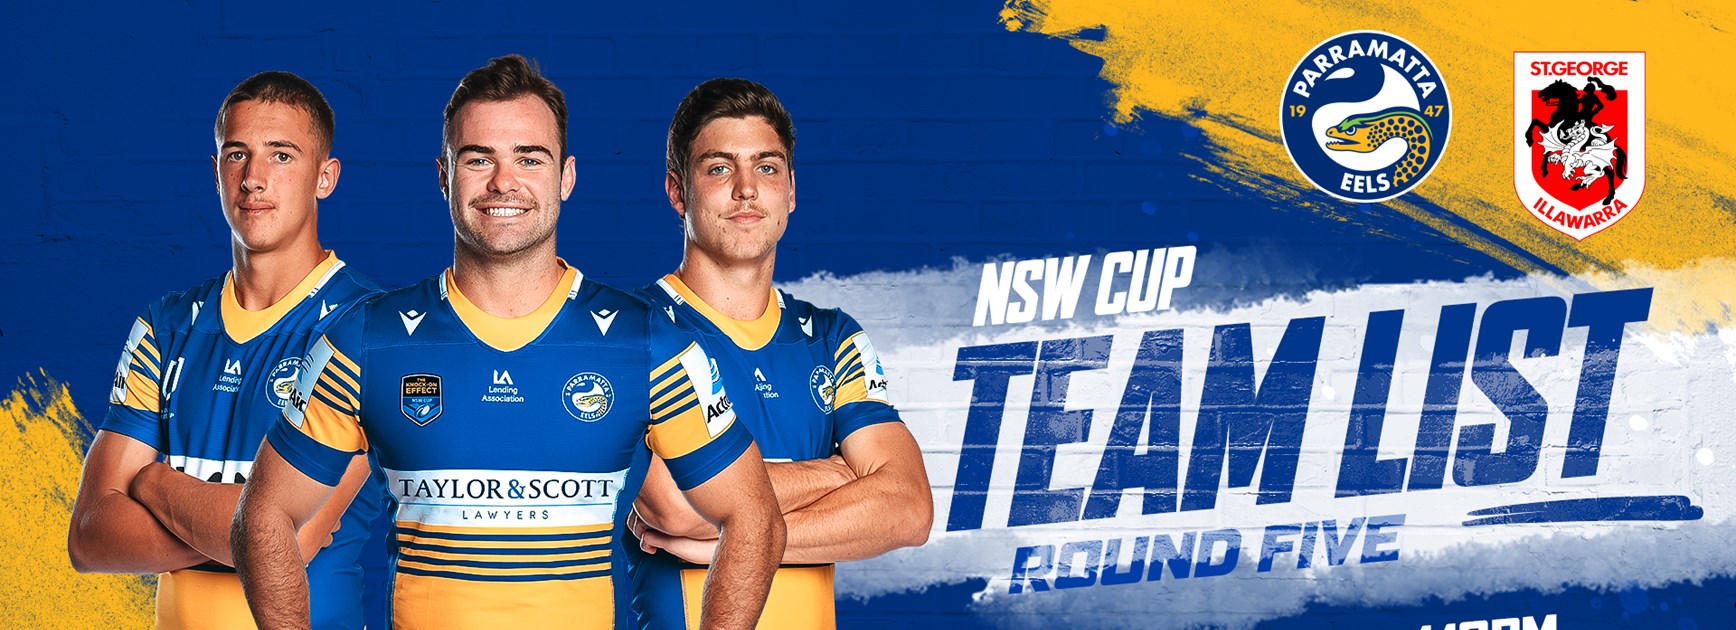 NSW Cup Team List - Eels v Dragons, Round Five